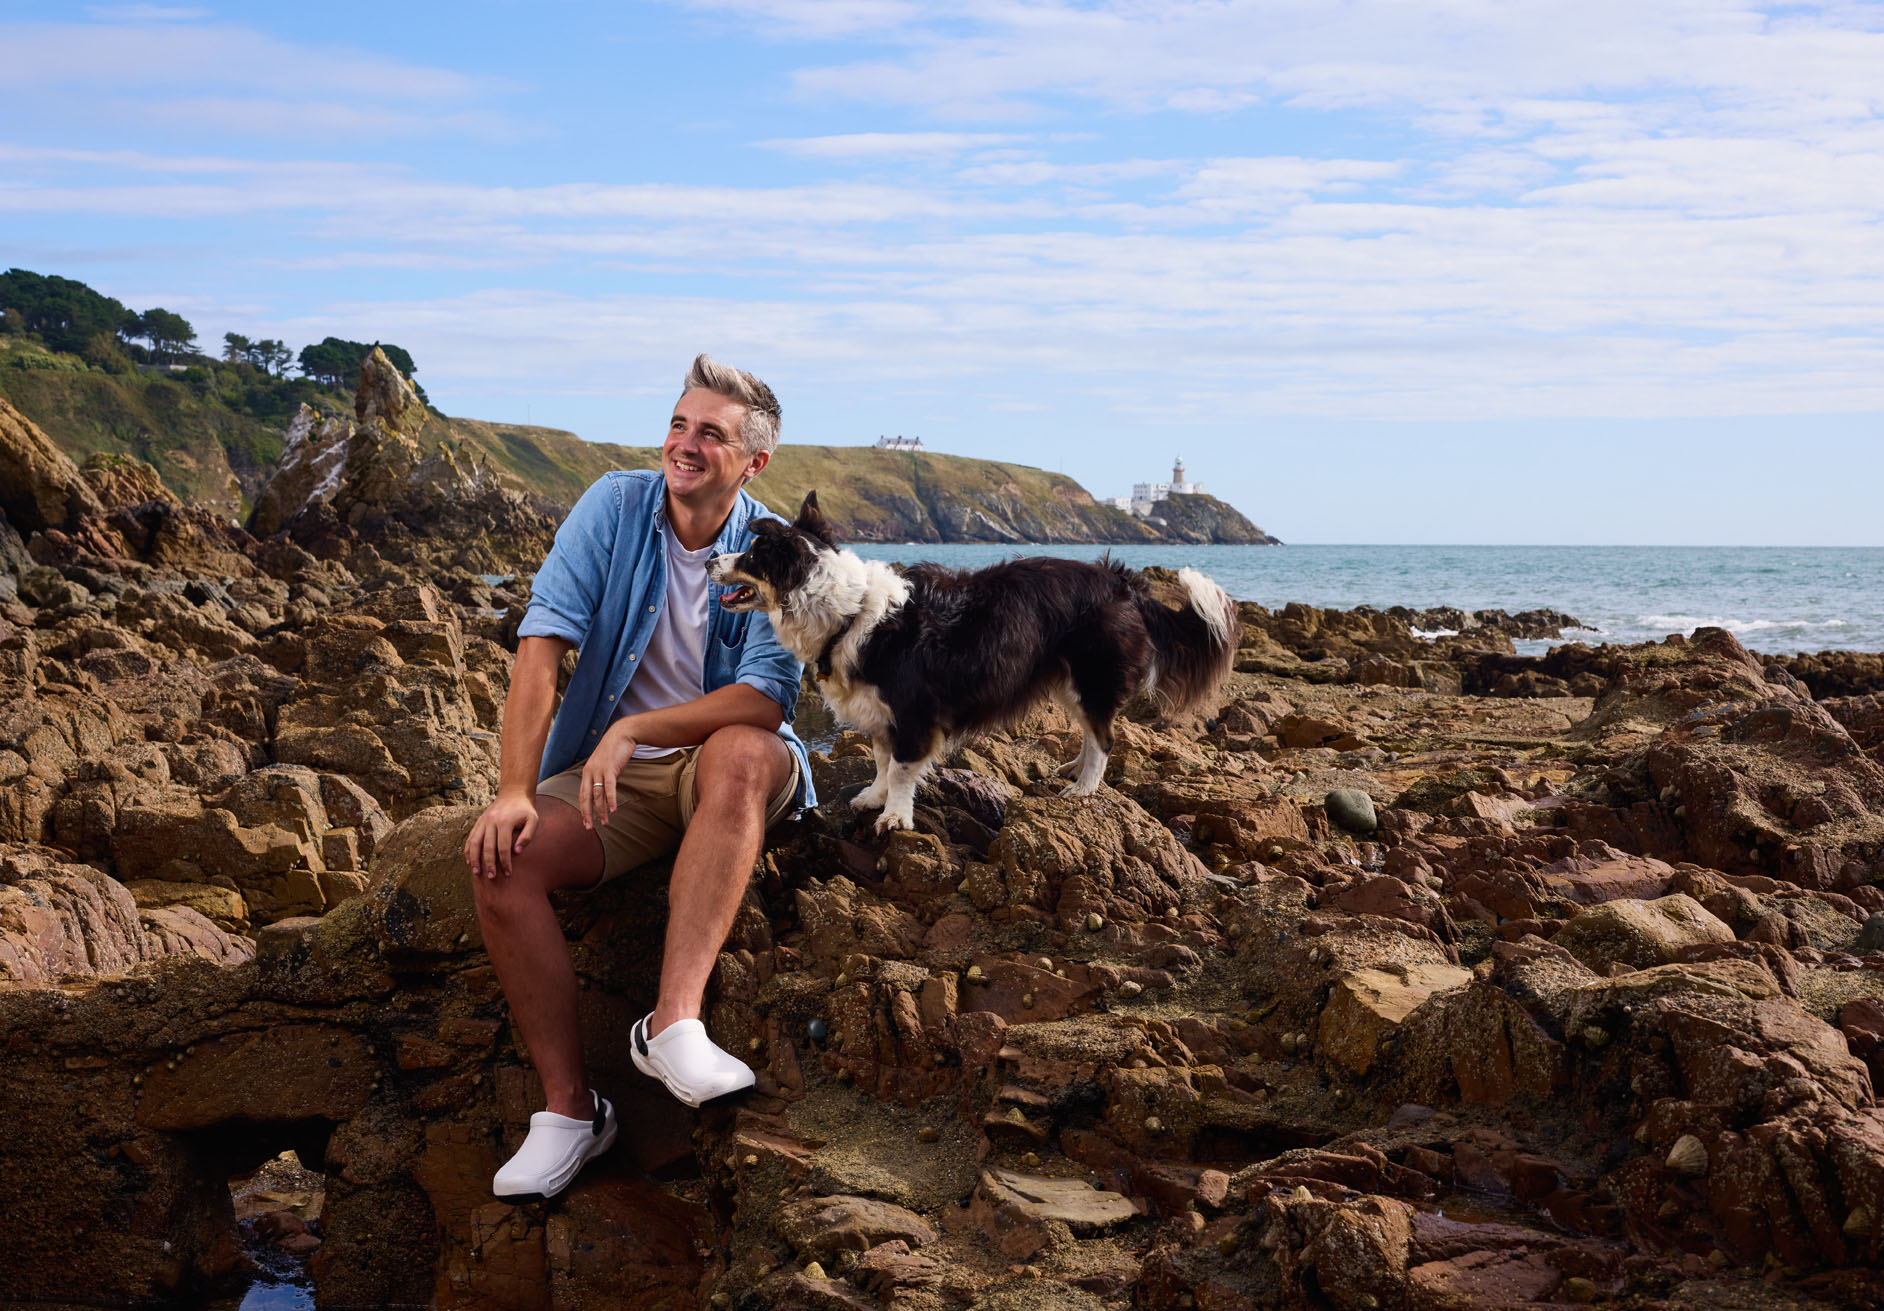 location portrait photography: donal skeha nand his dog max